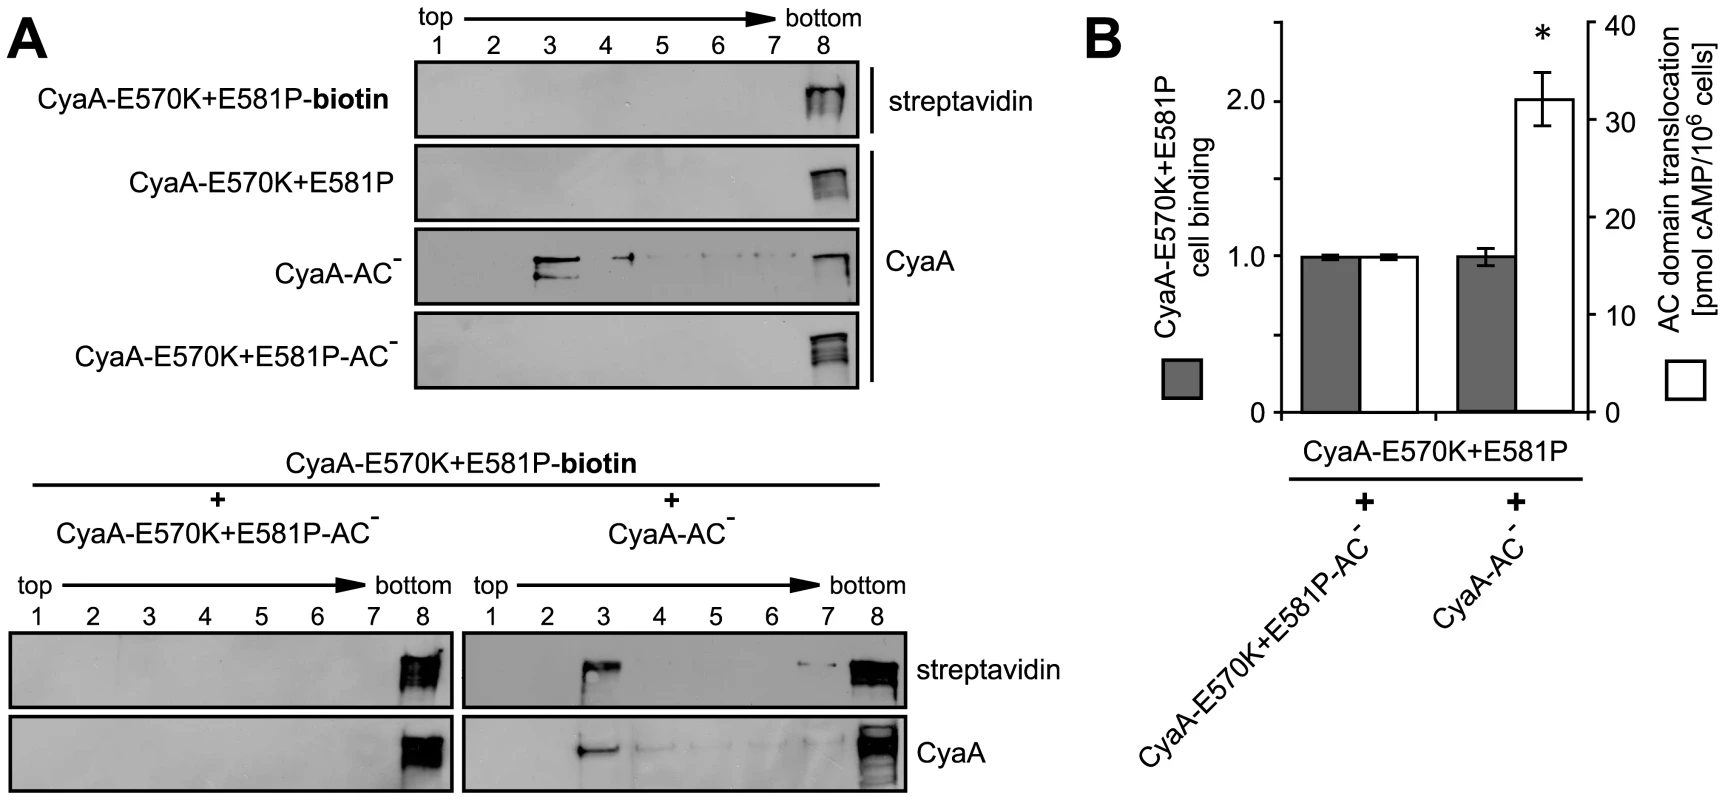 AC domain of CyaA translocates across cellular membrane from lipid rafts.